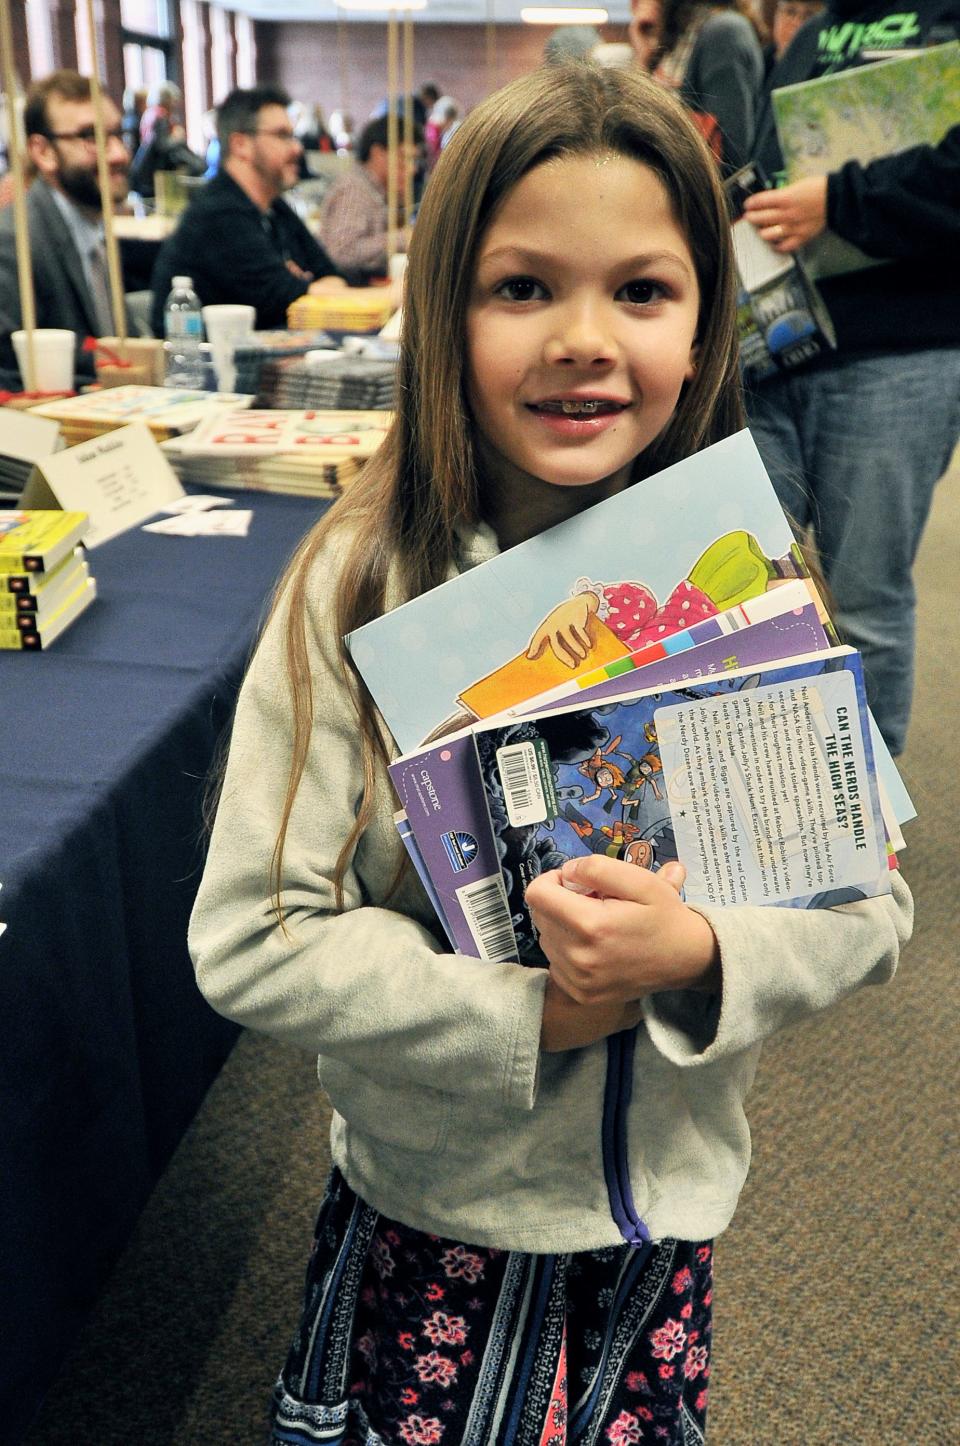 The annual Buckeye Book Fair will be held Saturday at the Greystone Event Center in Wooster.